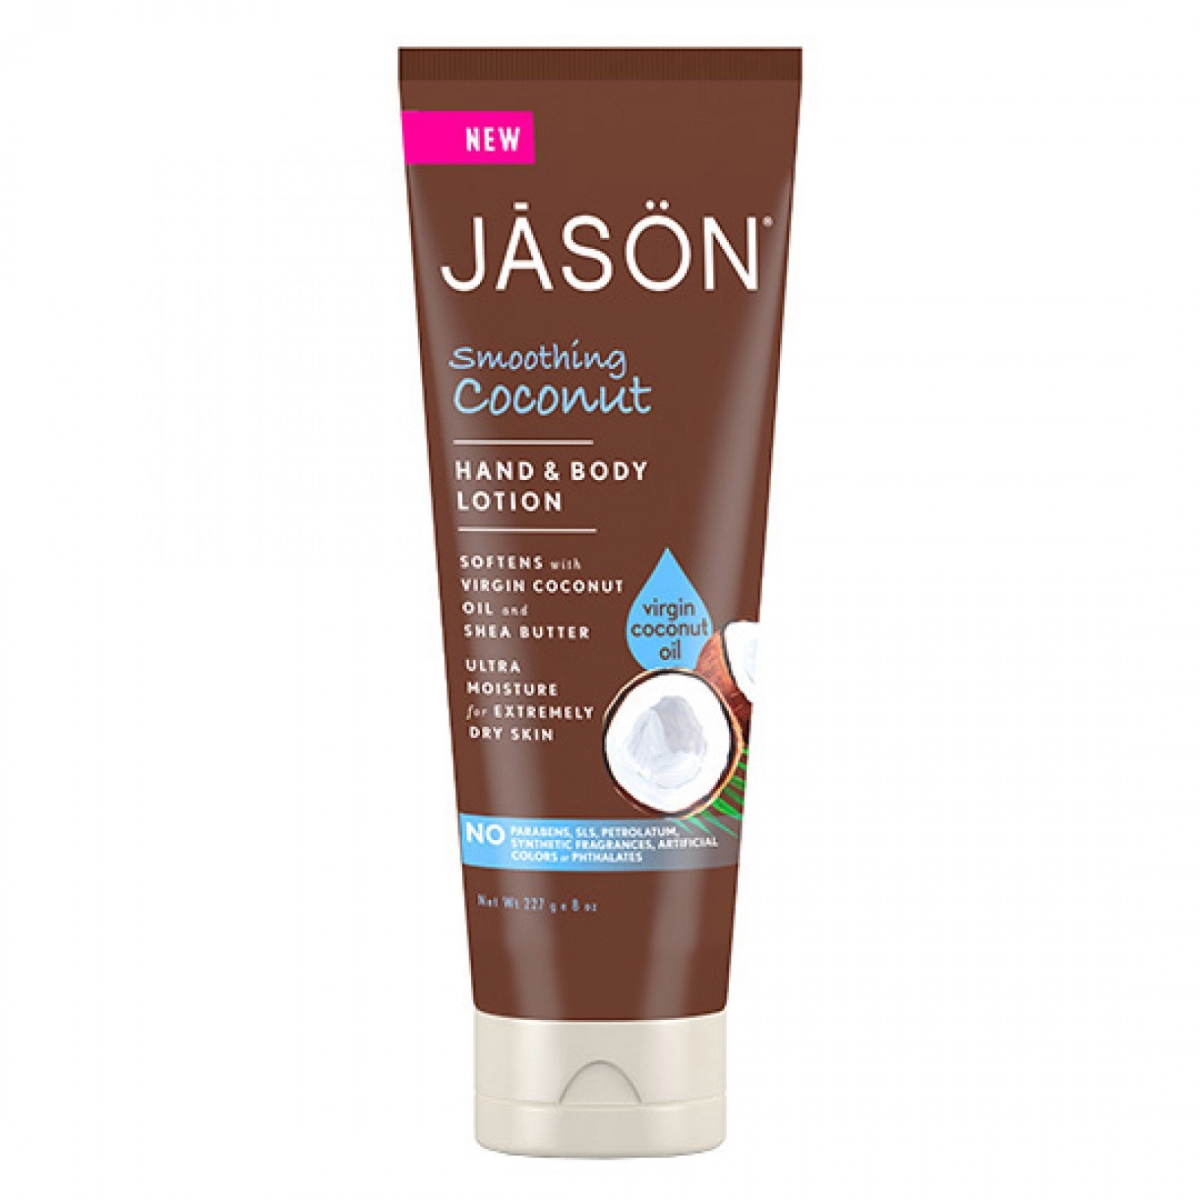 230286 8 Fl Oz Jason Hand & Body Care Smoothing Coconut Lotions